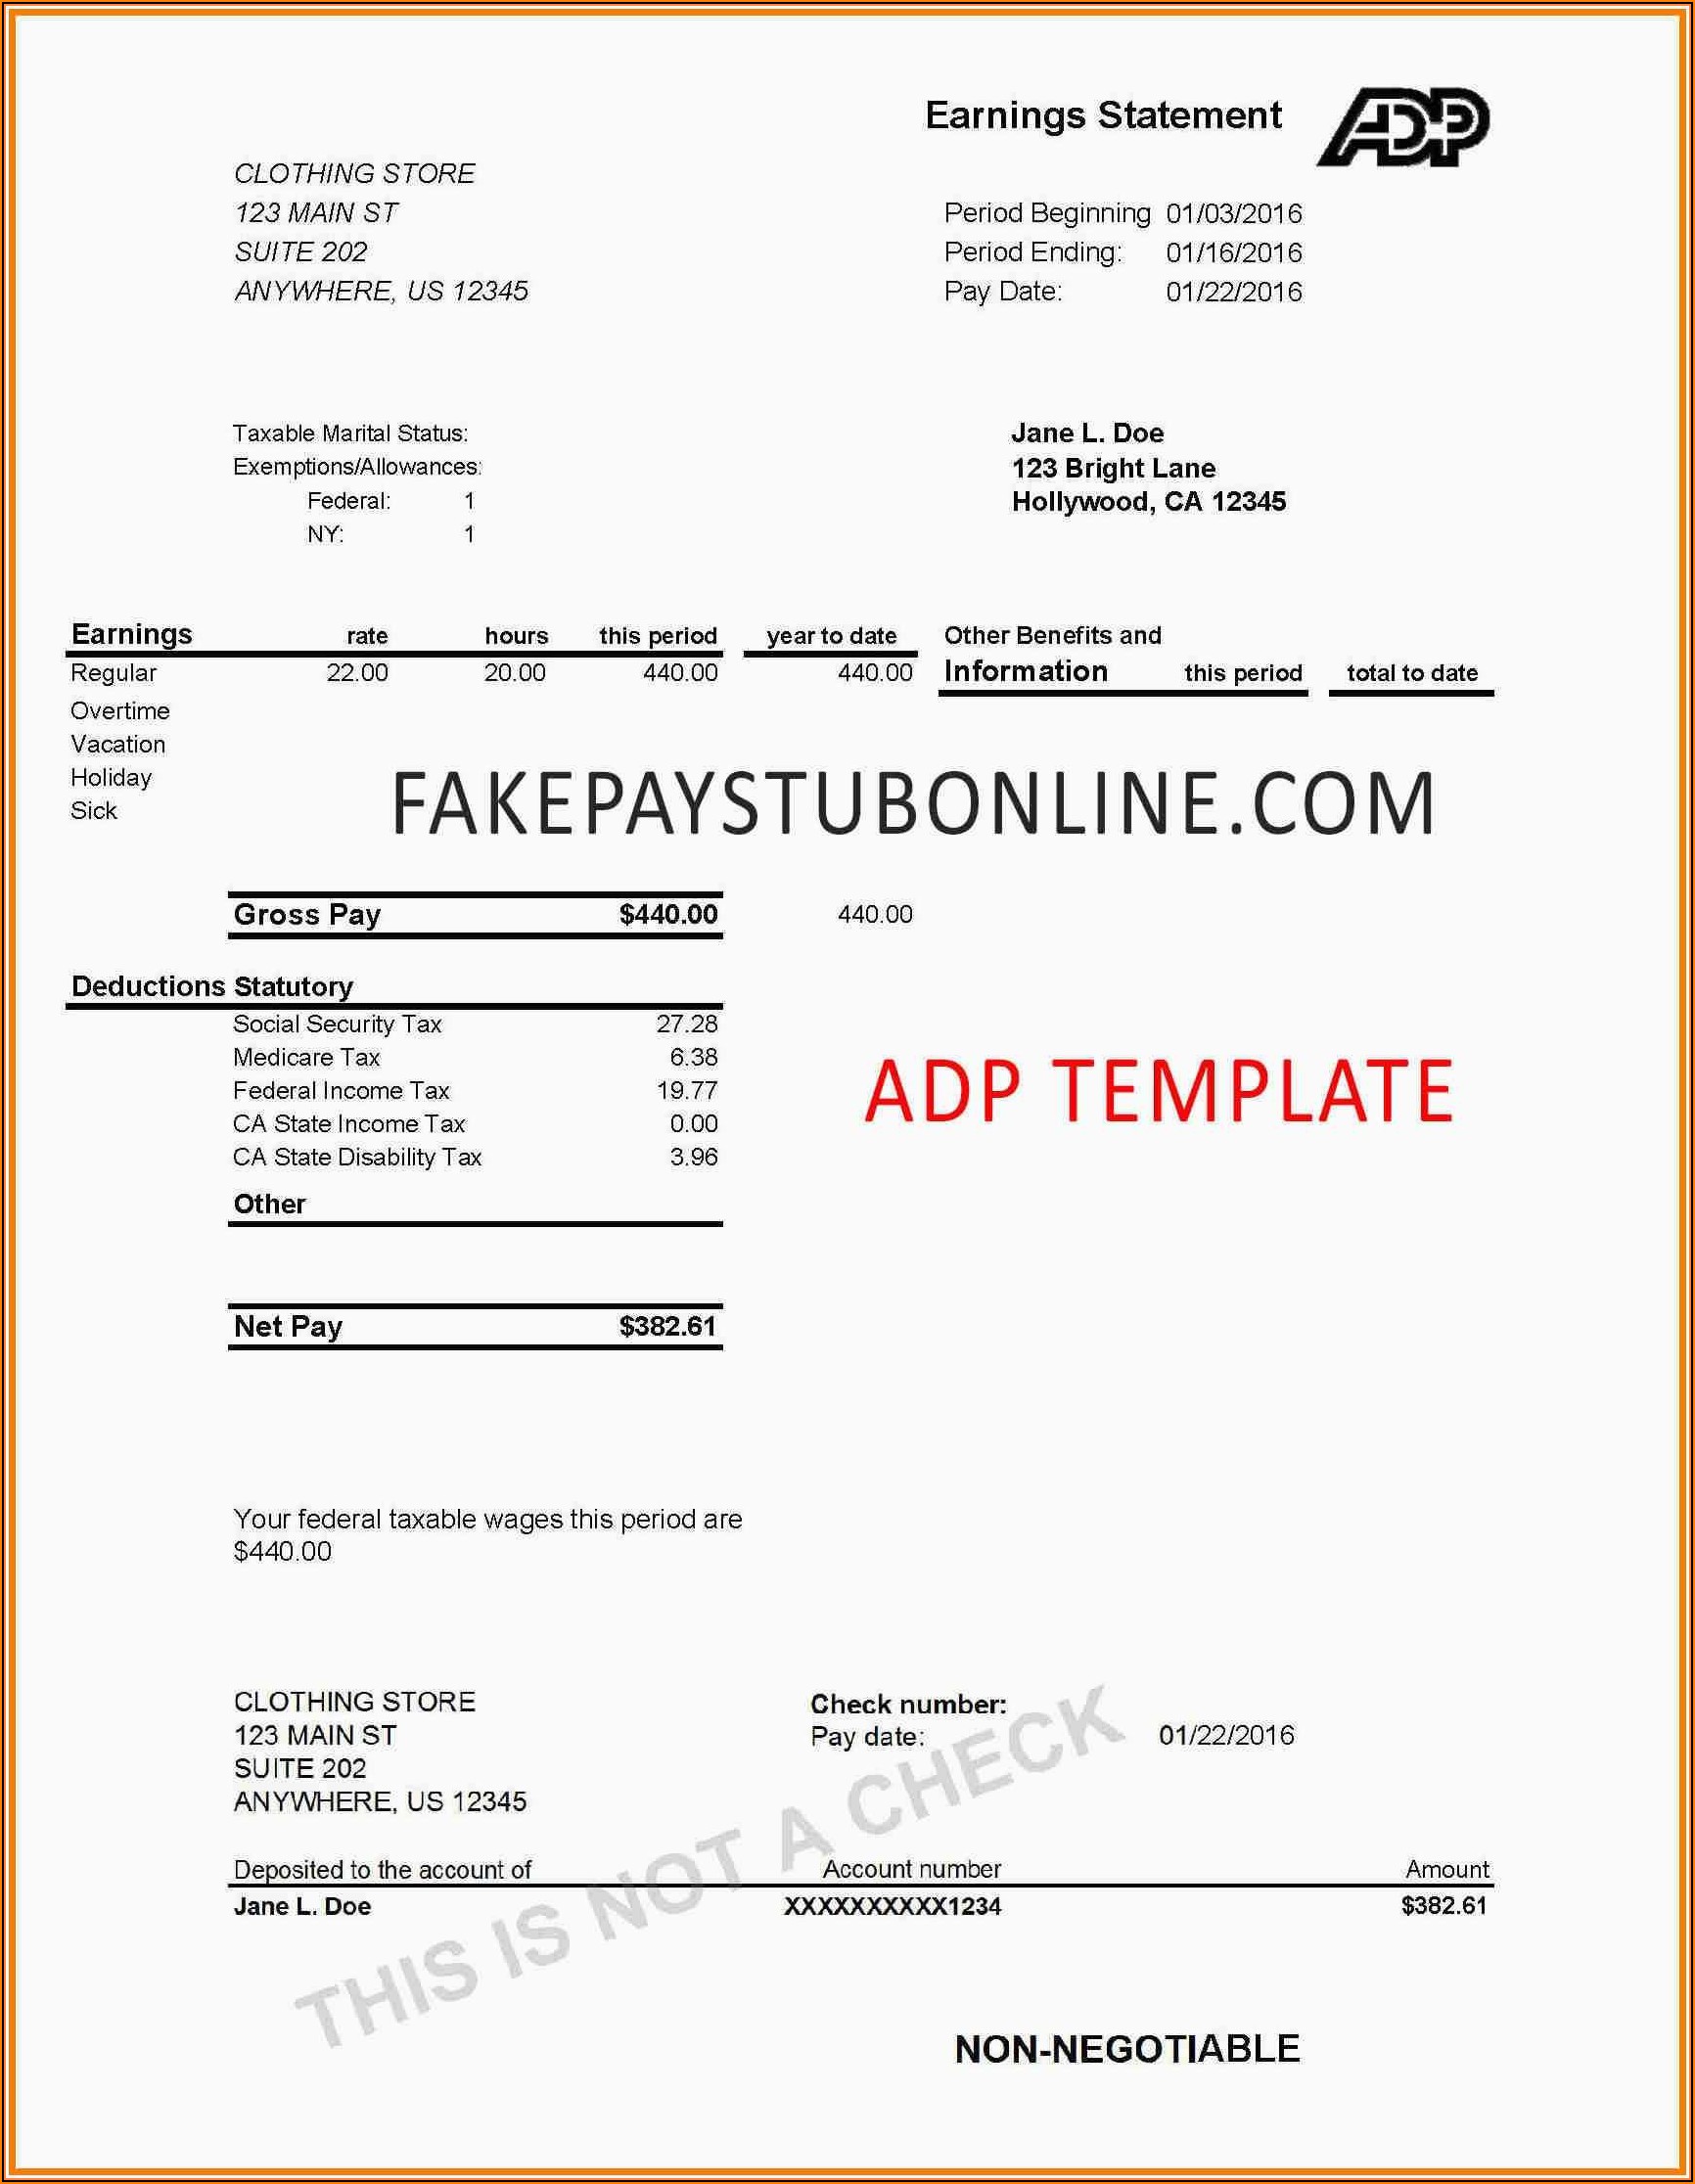 Fake Pay Stub Template Adp Template 2 Resume Examples Bw9jQv0j27